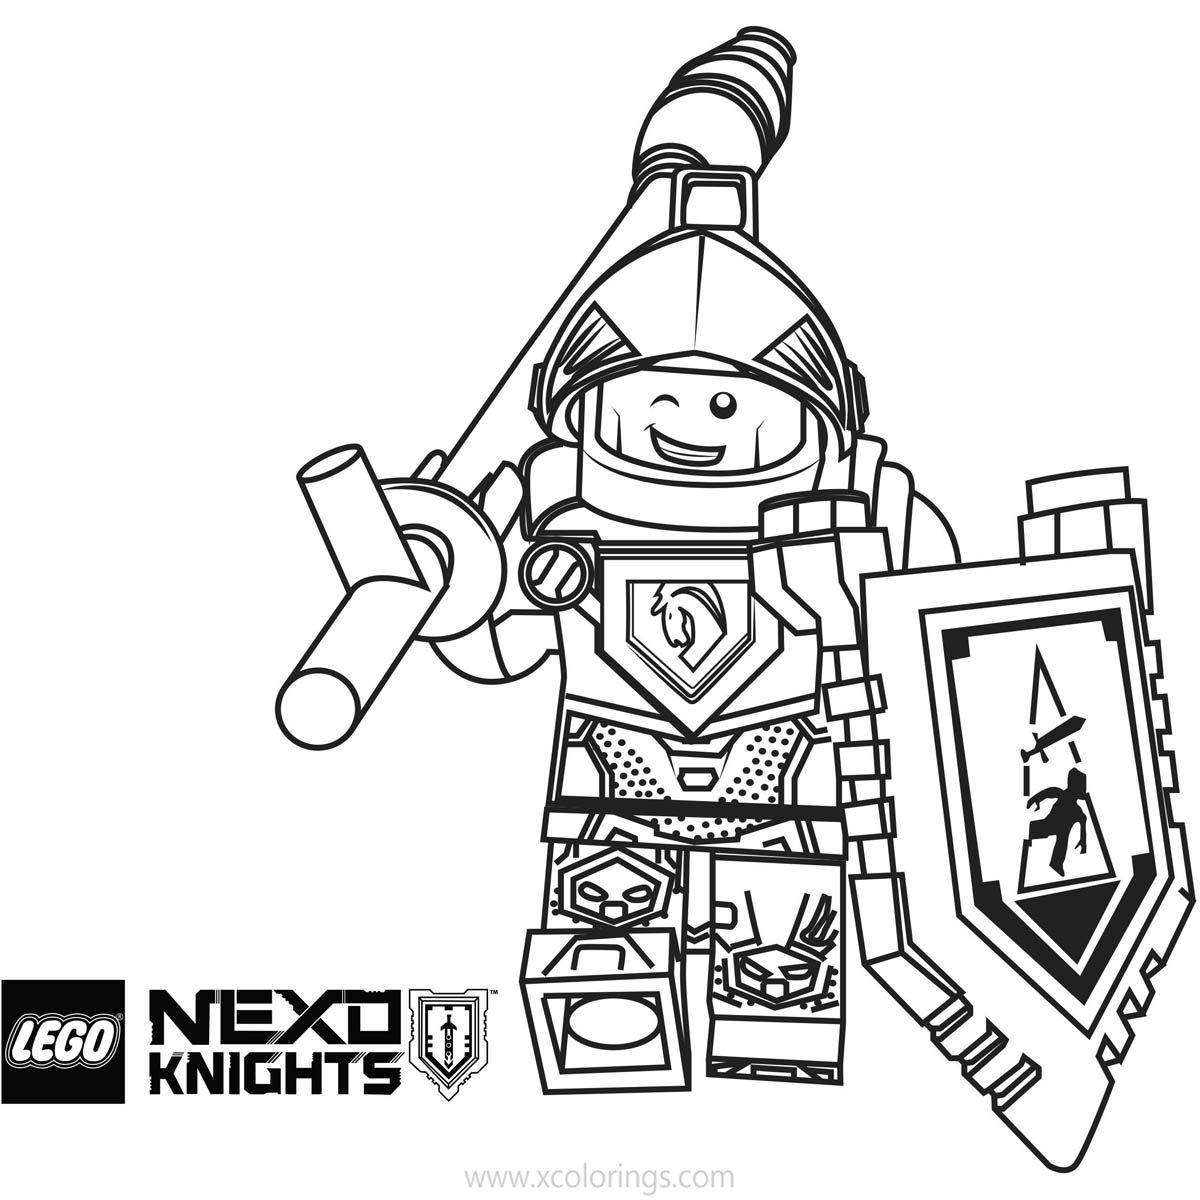 Free LEGO NEXO Knights Coloring Pages Lace printable